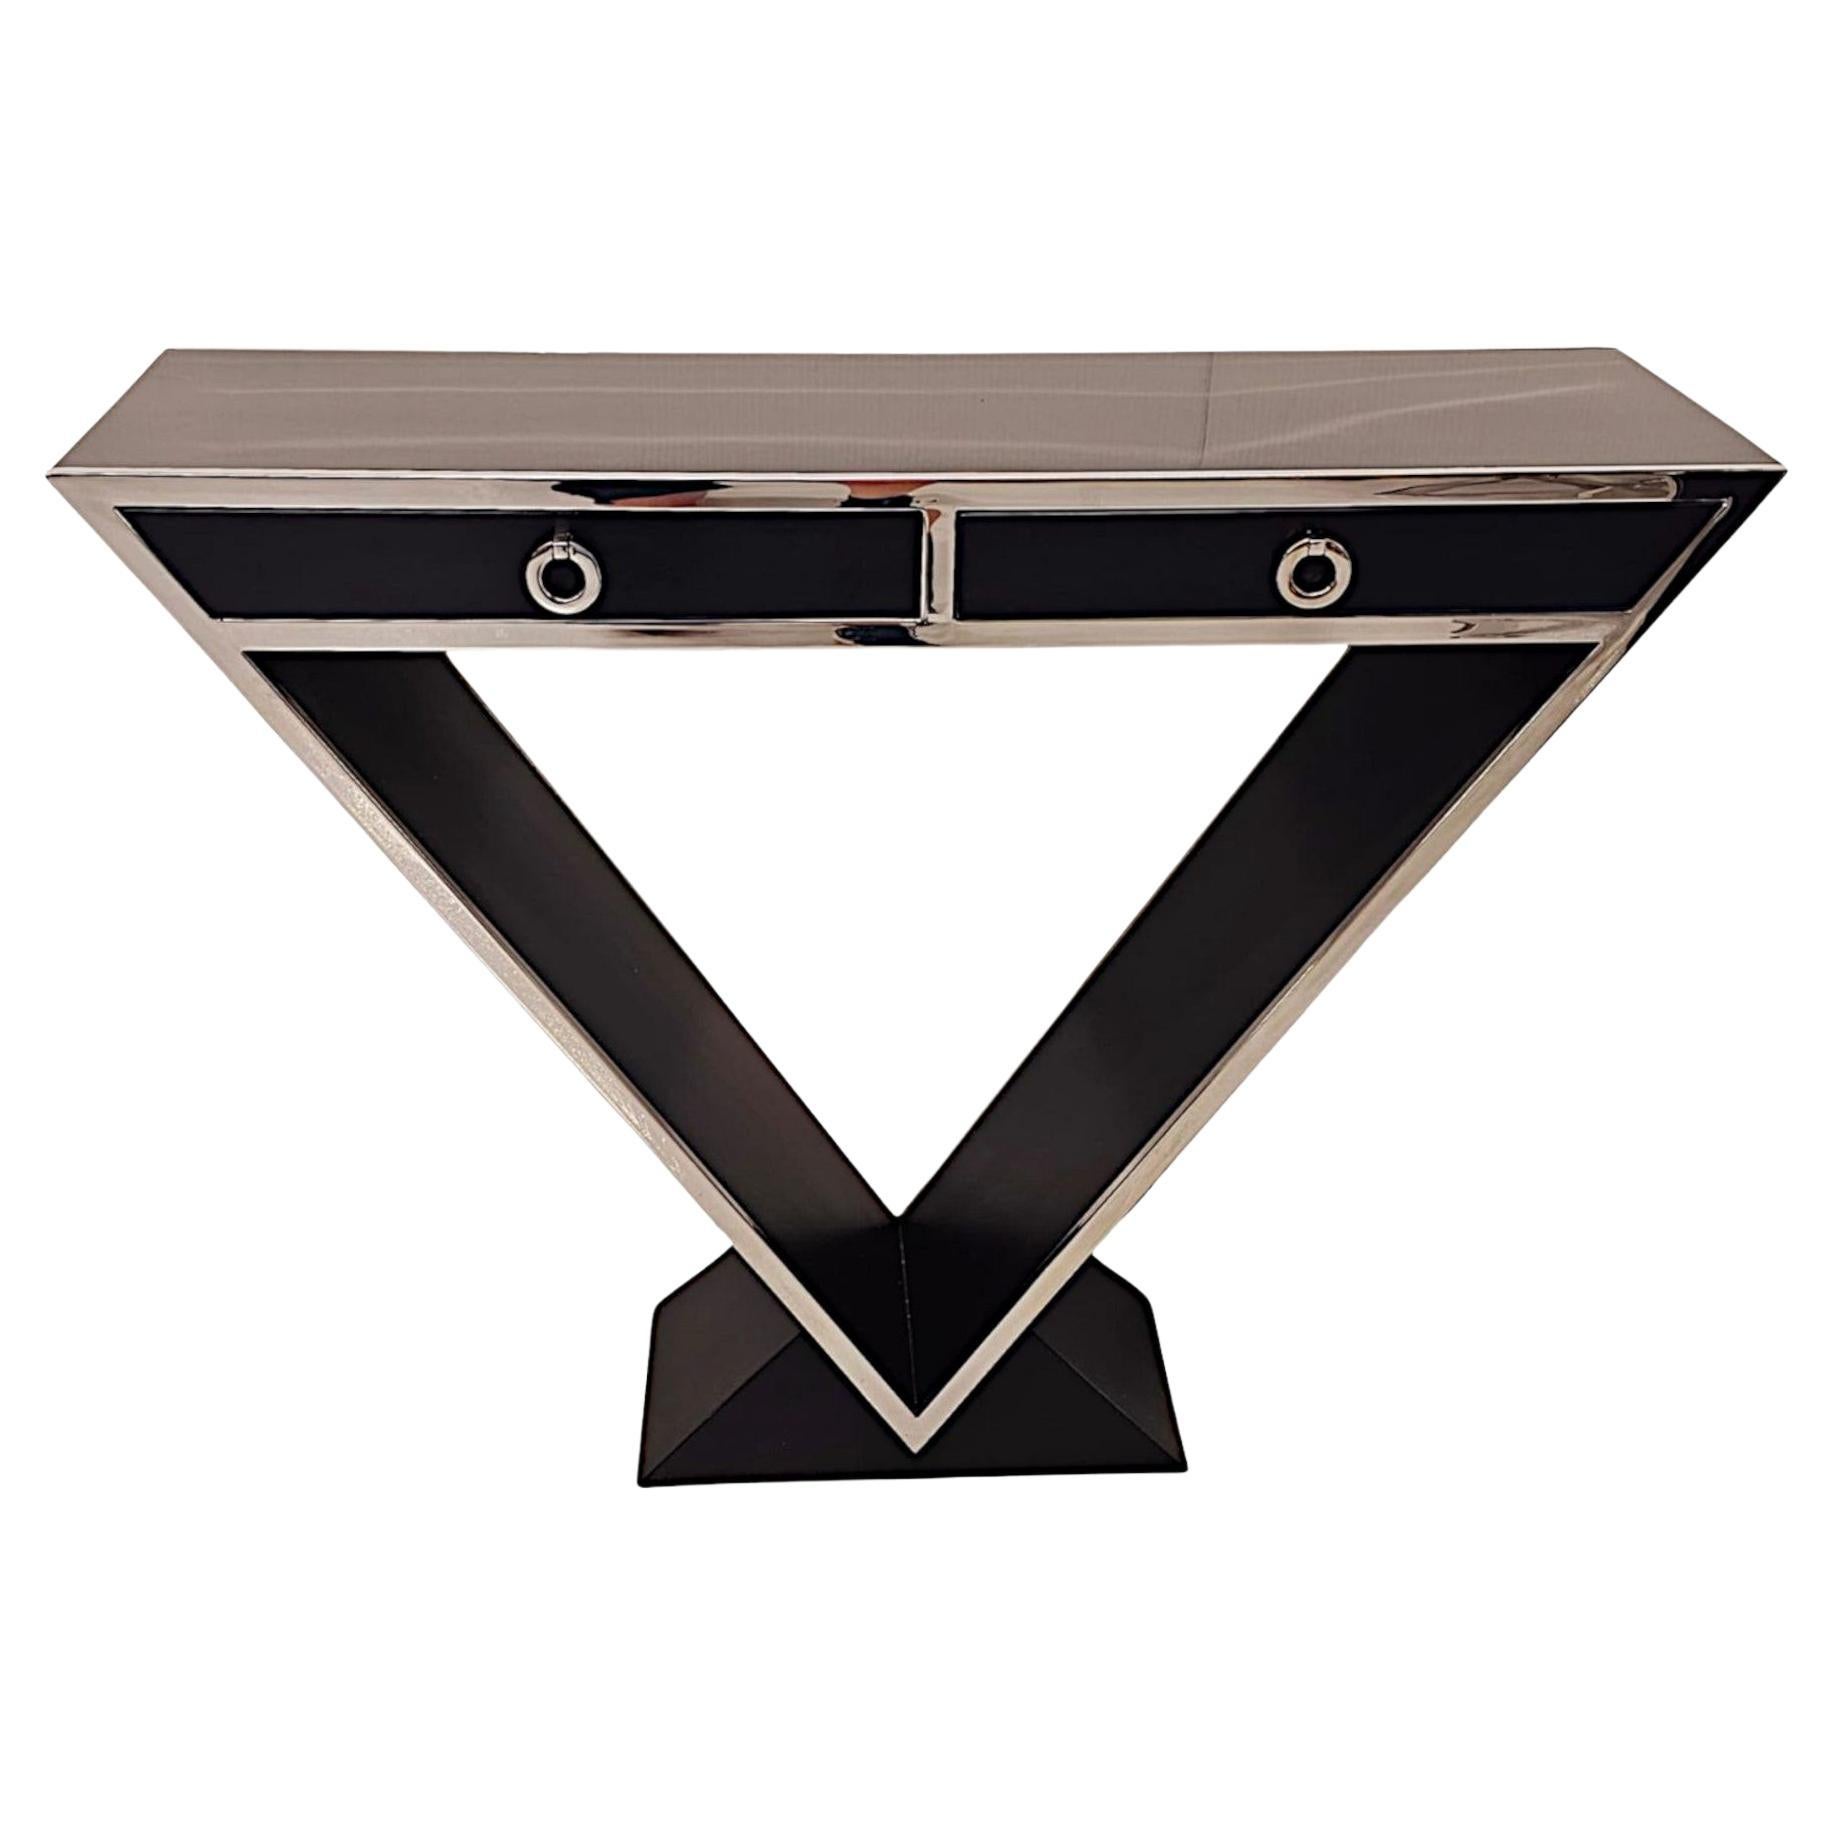  A Stunning Art Deco Style Black Laquered Timber and Chrome Console Table For Sale